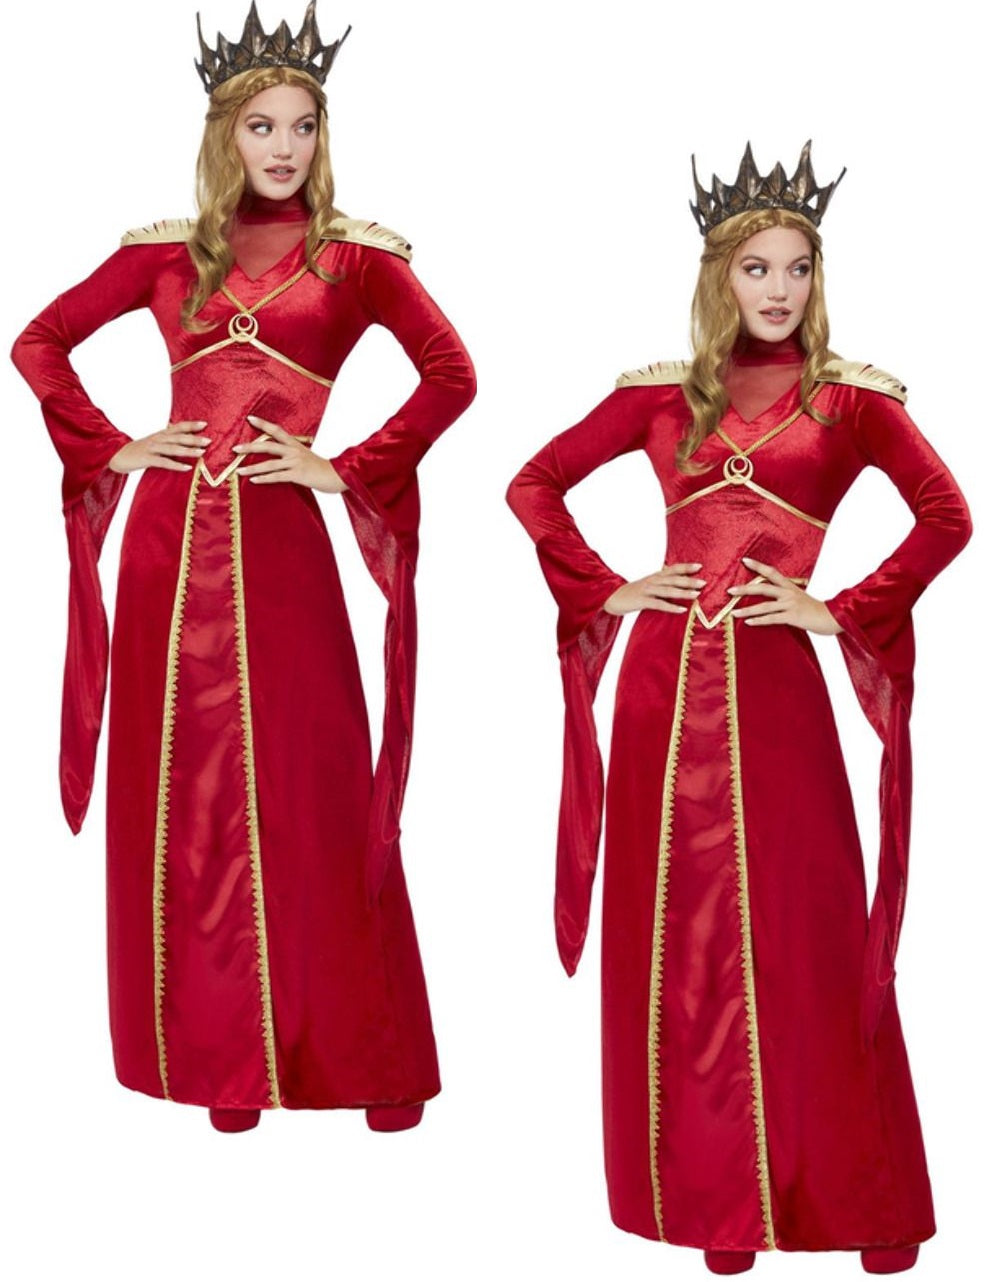 The Red Queen Costume